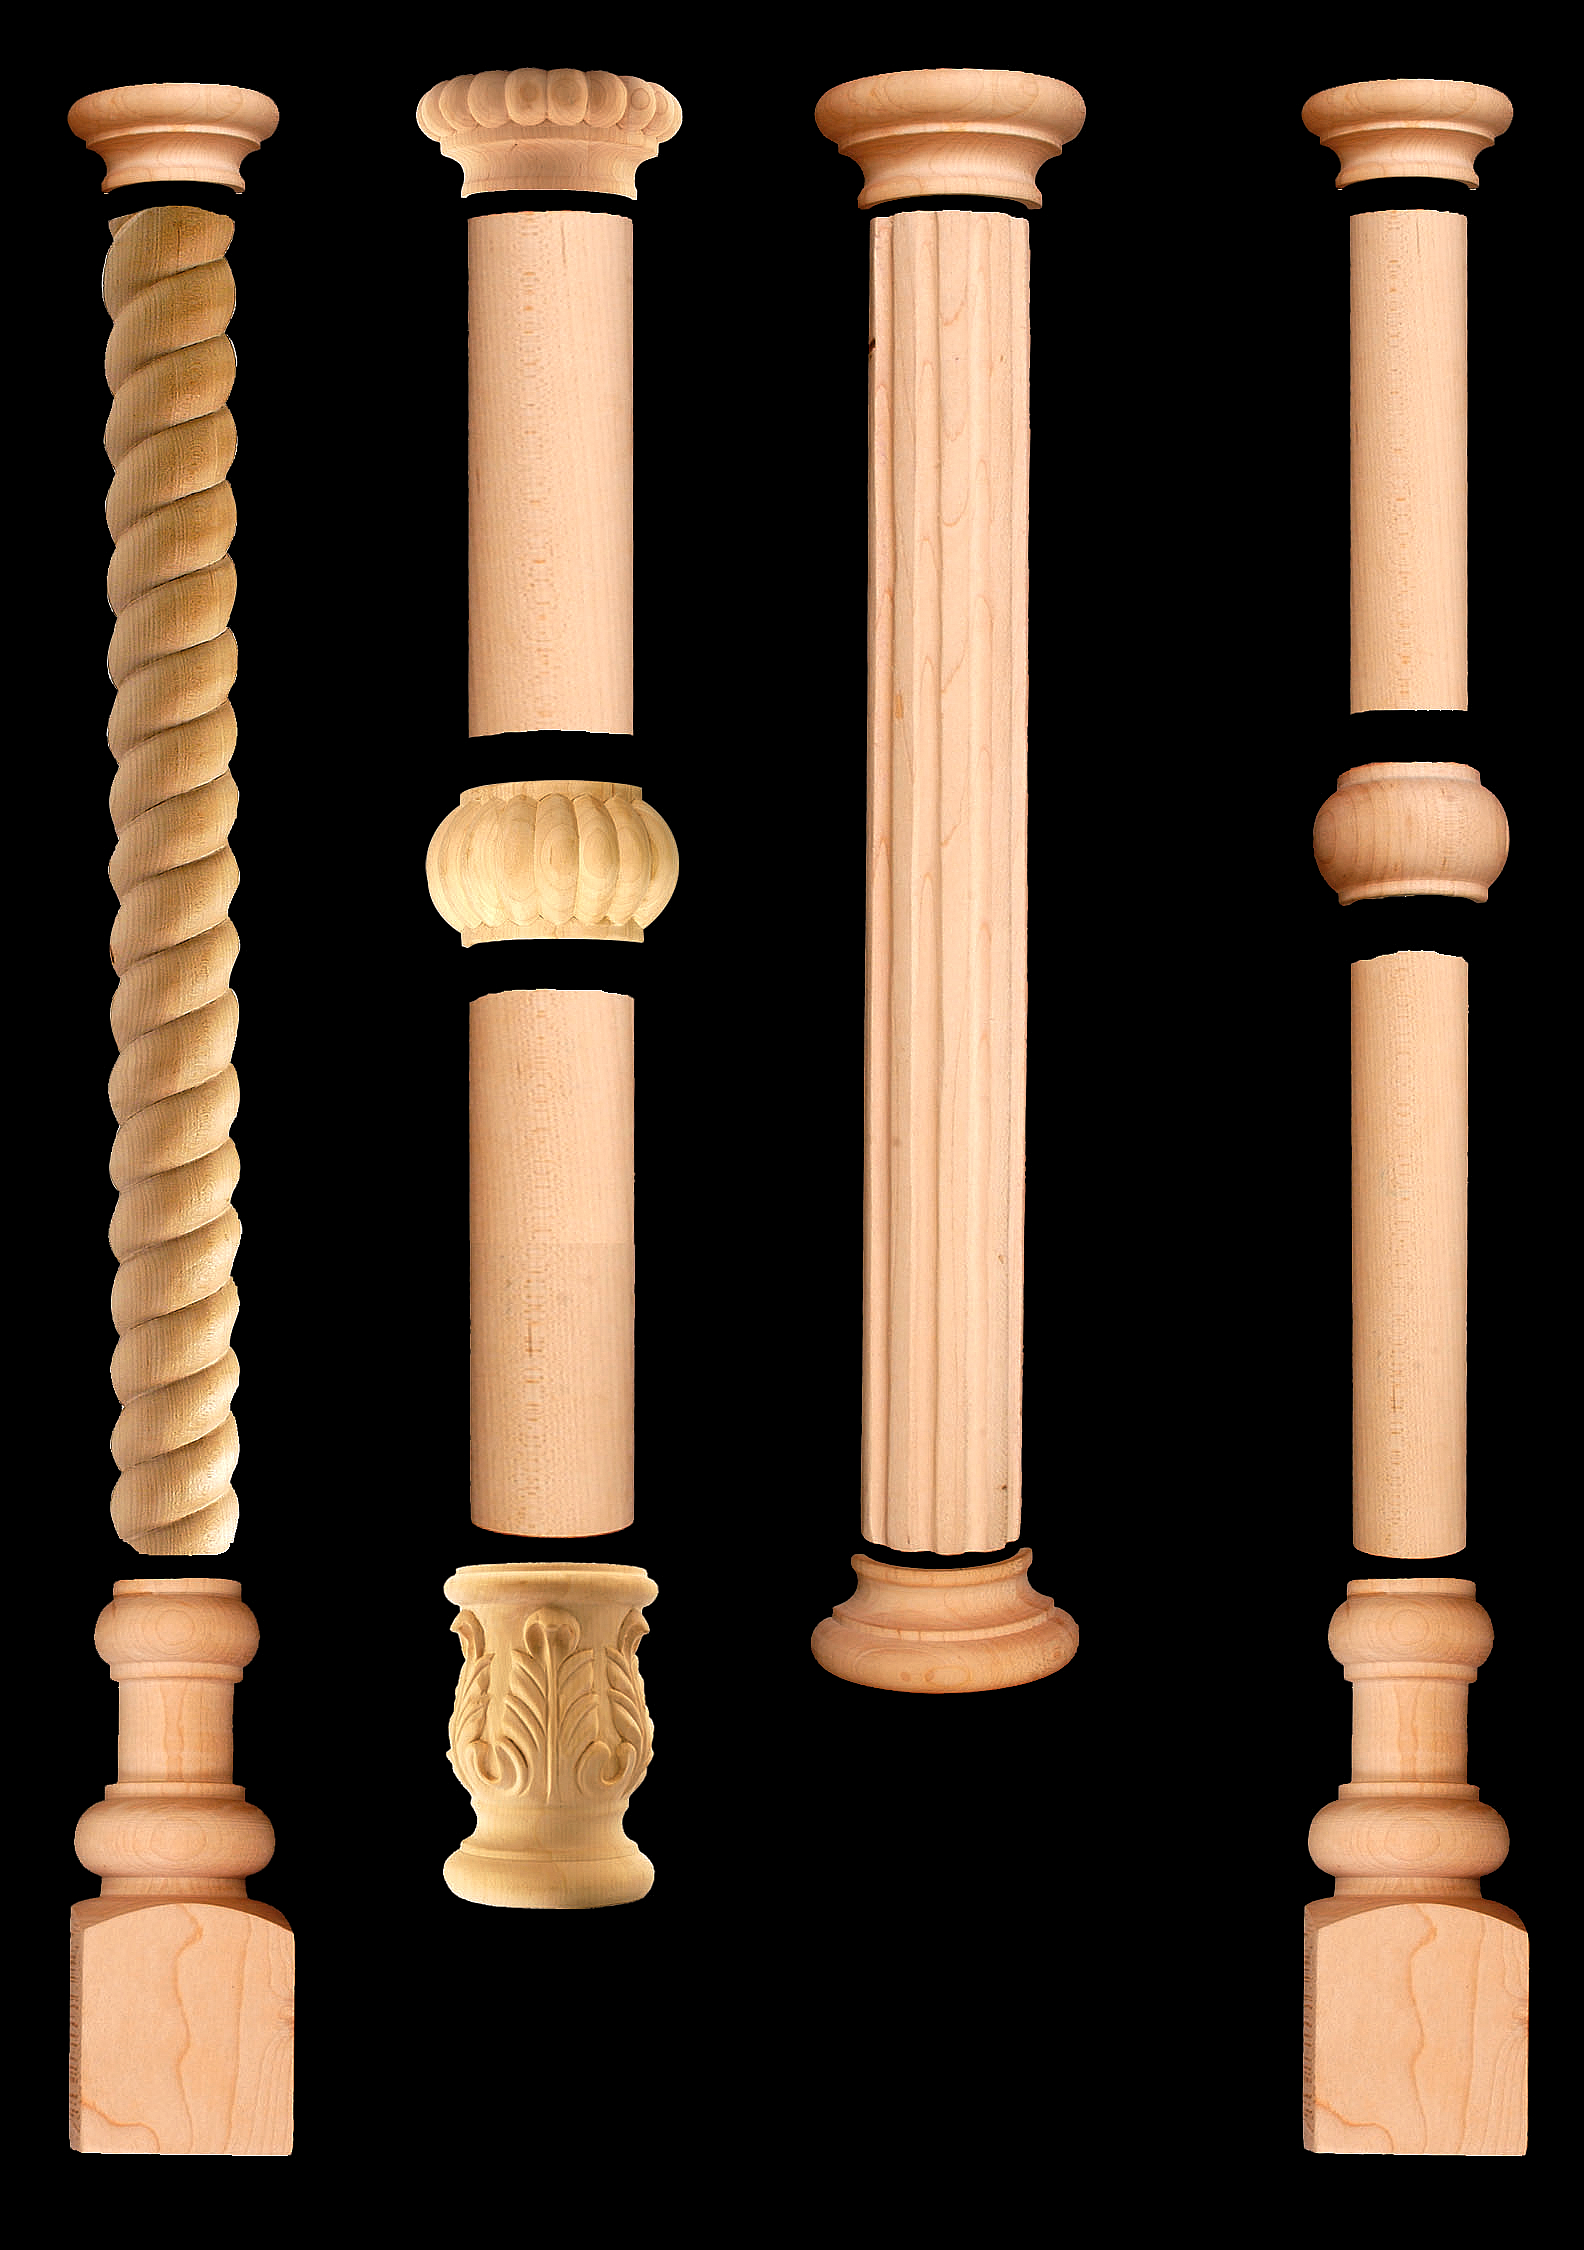 Outwater Introduces Its Updated Design A Column Decorative